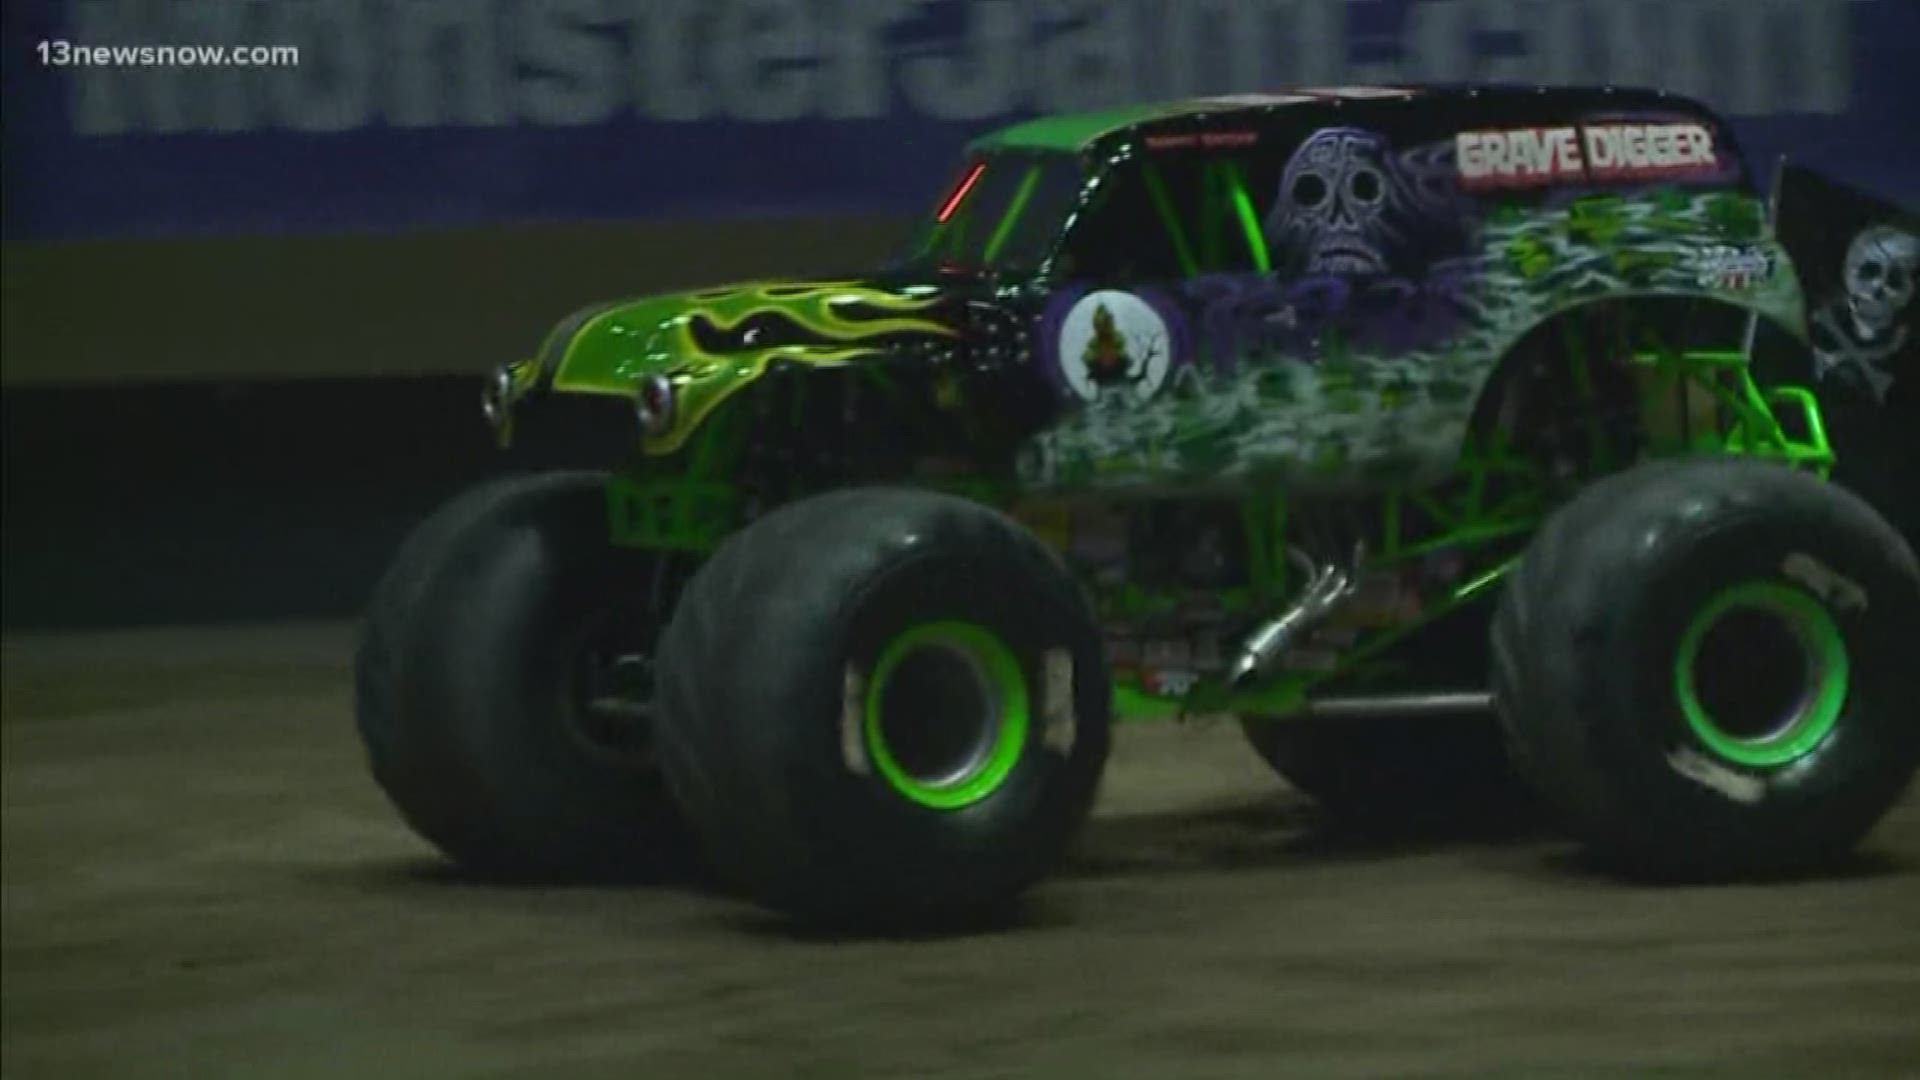 Big bad Monster Jam is headed to Hampton this weekend! There will be shows Friday, Saturday and Sunday.